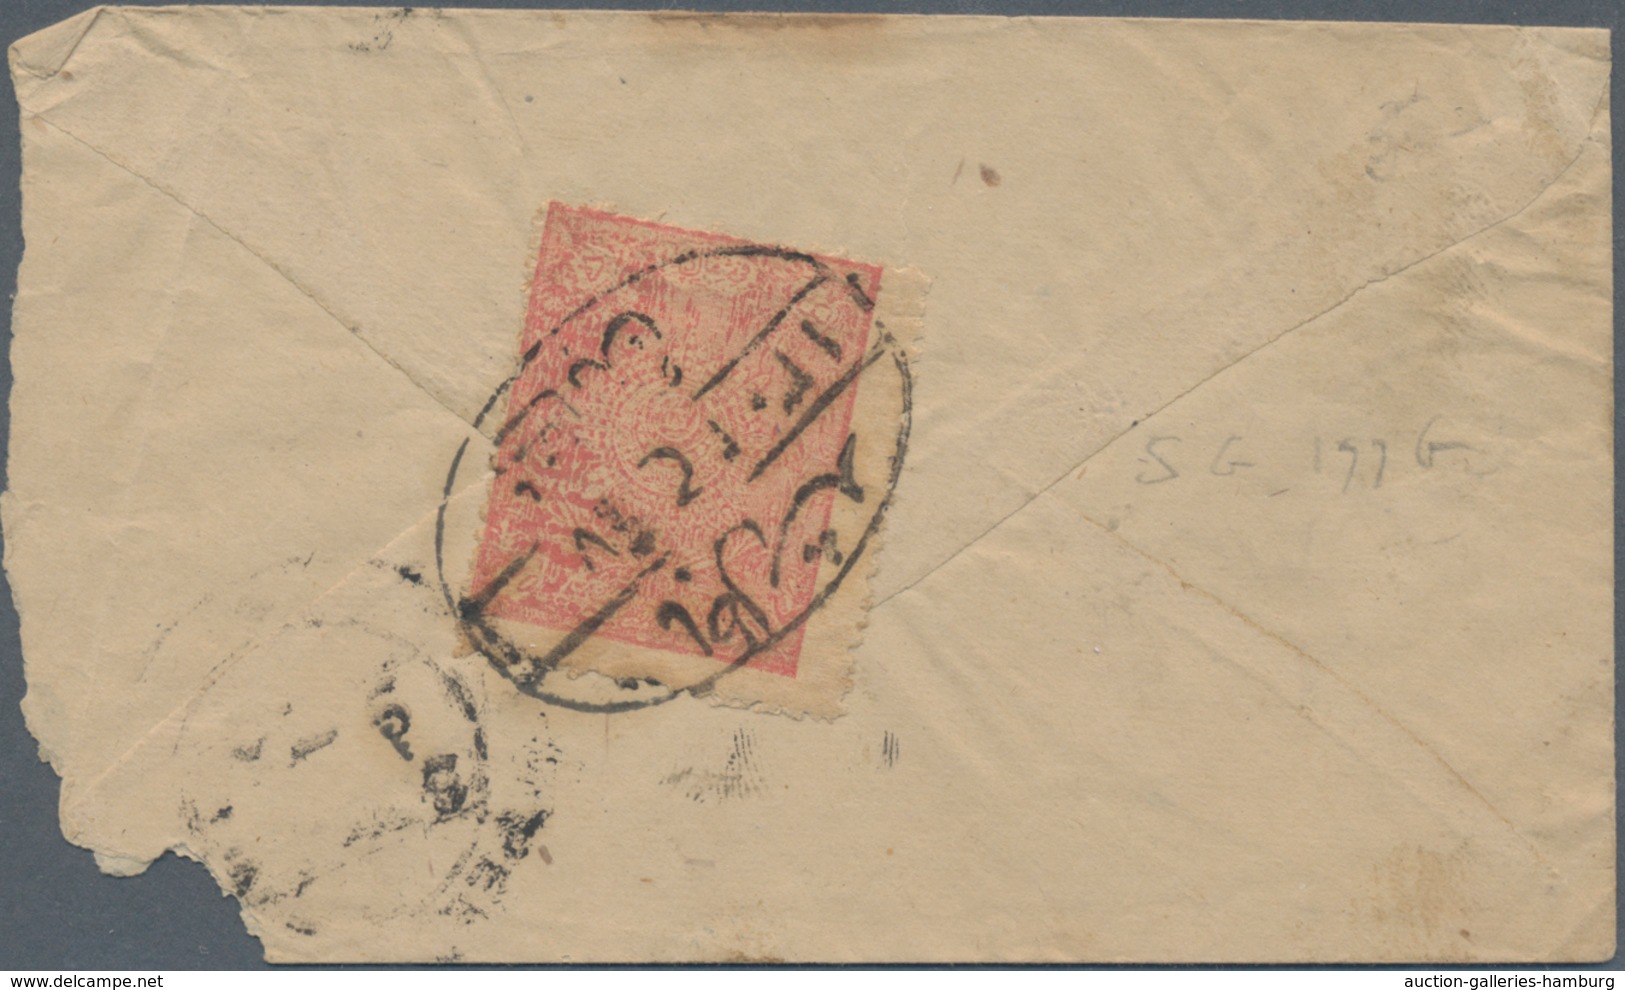 Afghanistan: 1928/1968, about 120 covers including a great deal of registered airmail with emphasis